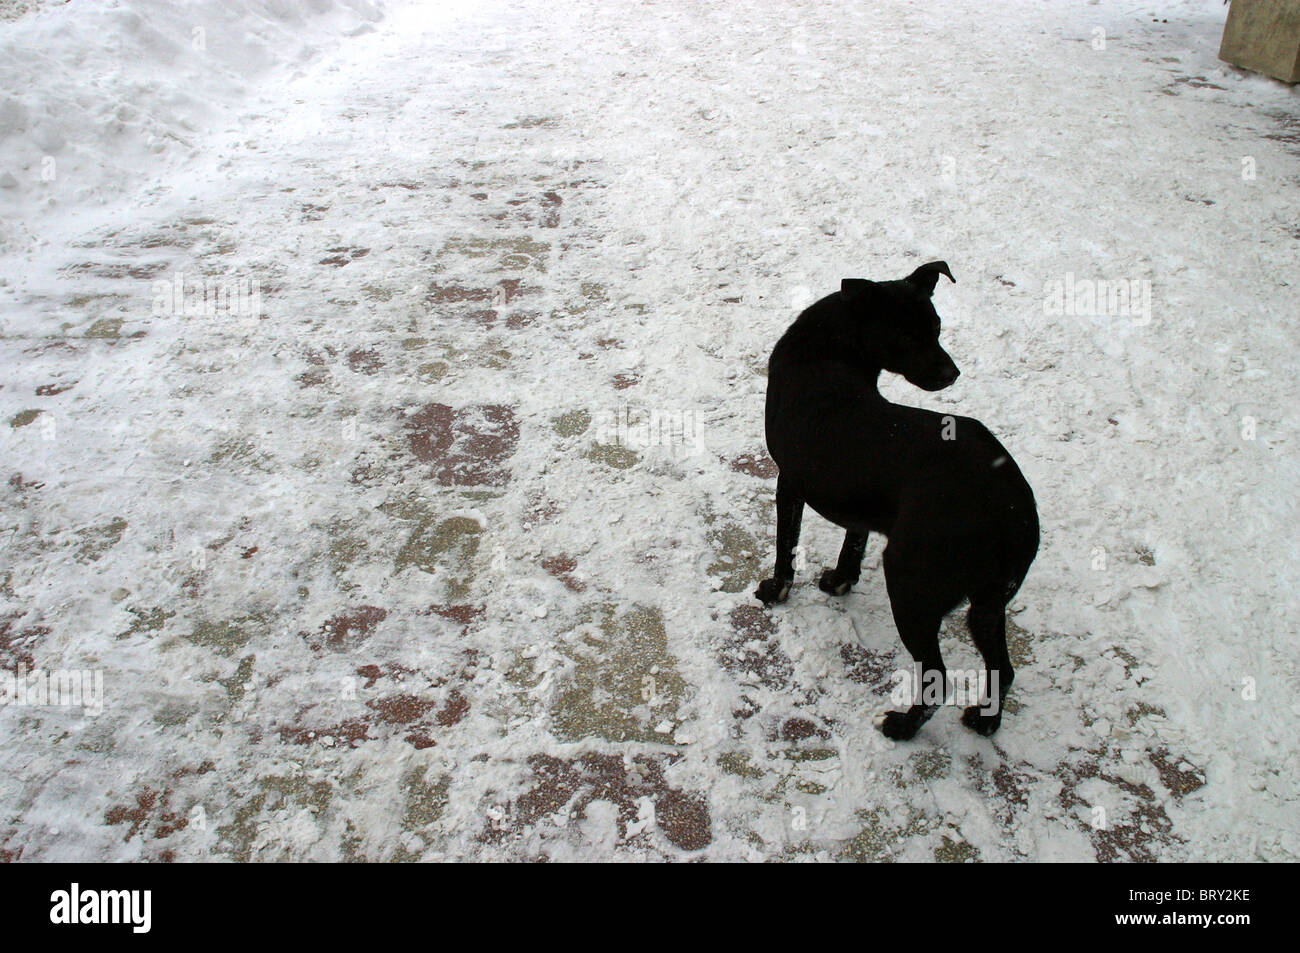 Black Dog silhouetted on snow. Stock Photo